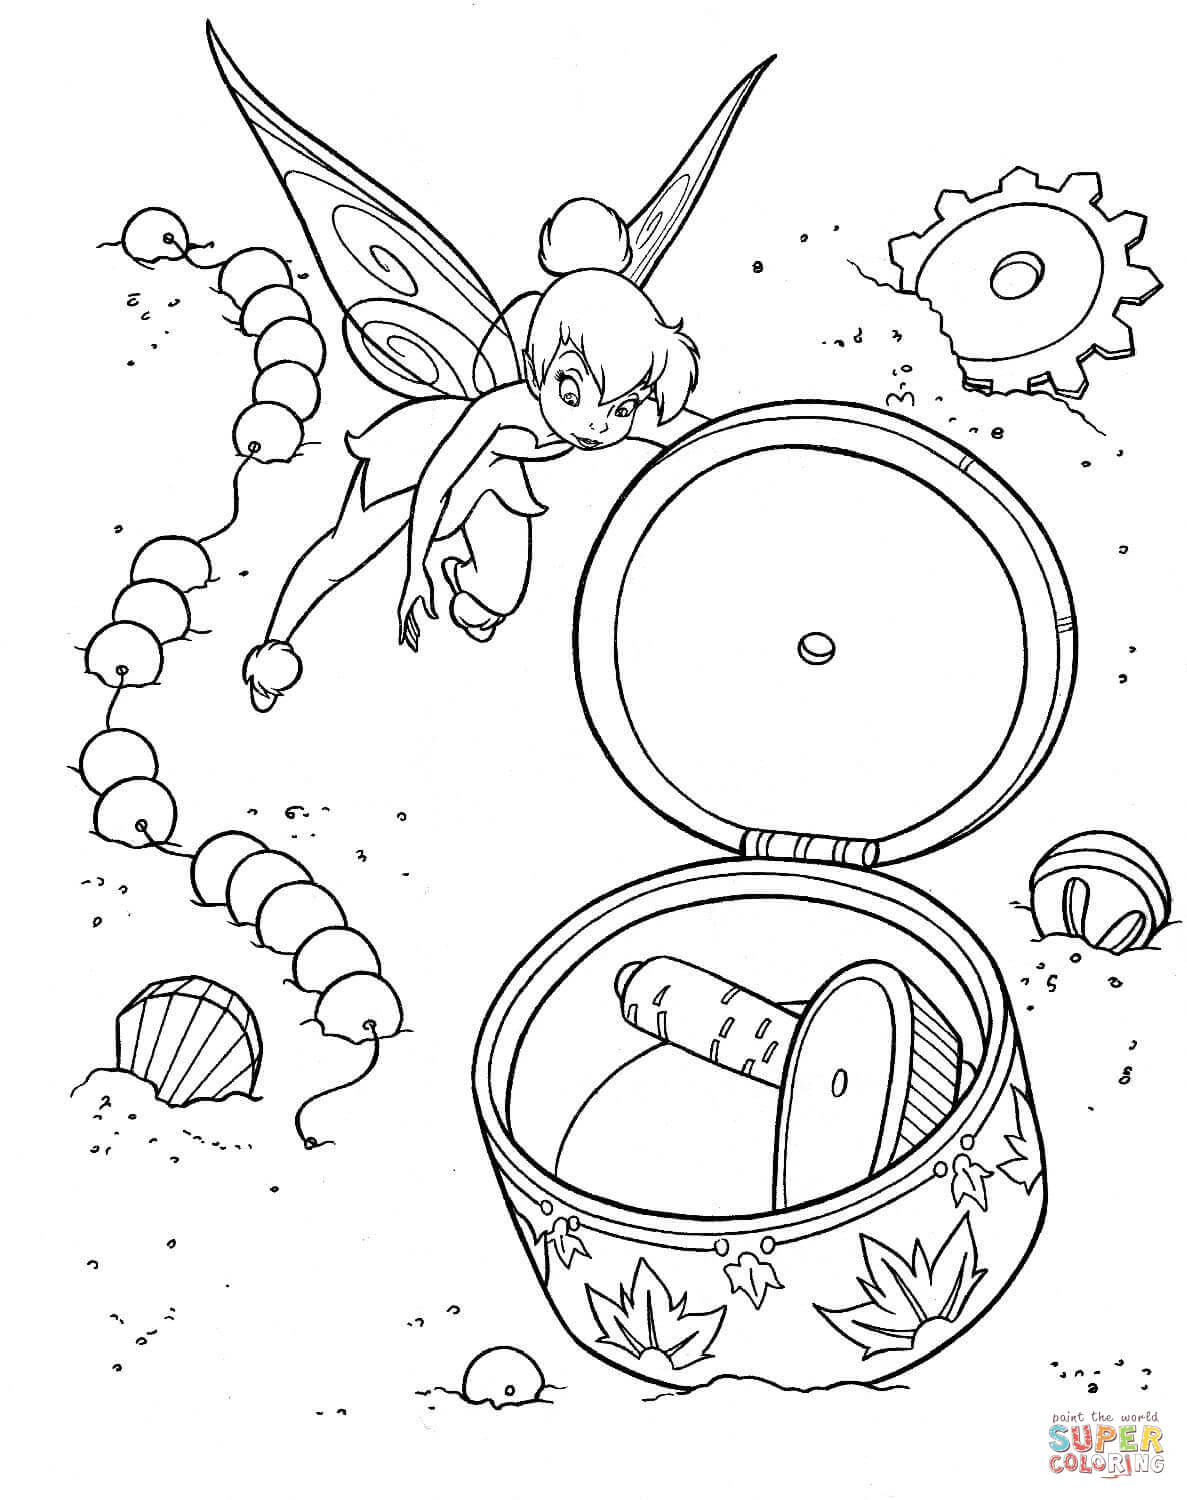 Fairy Queen Coloring Pages Disney Fairies Coloring Pages Free Coloring Pages